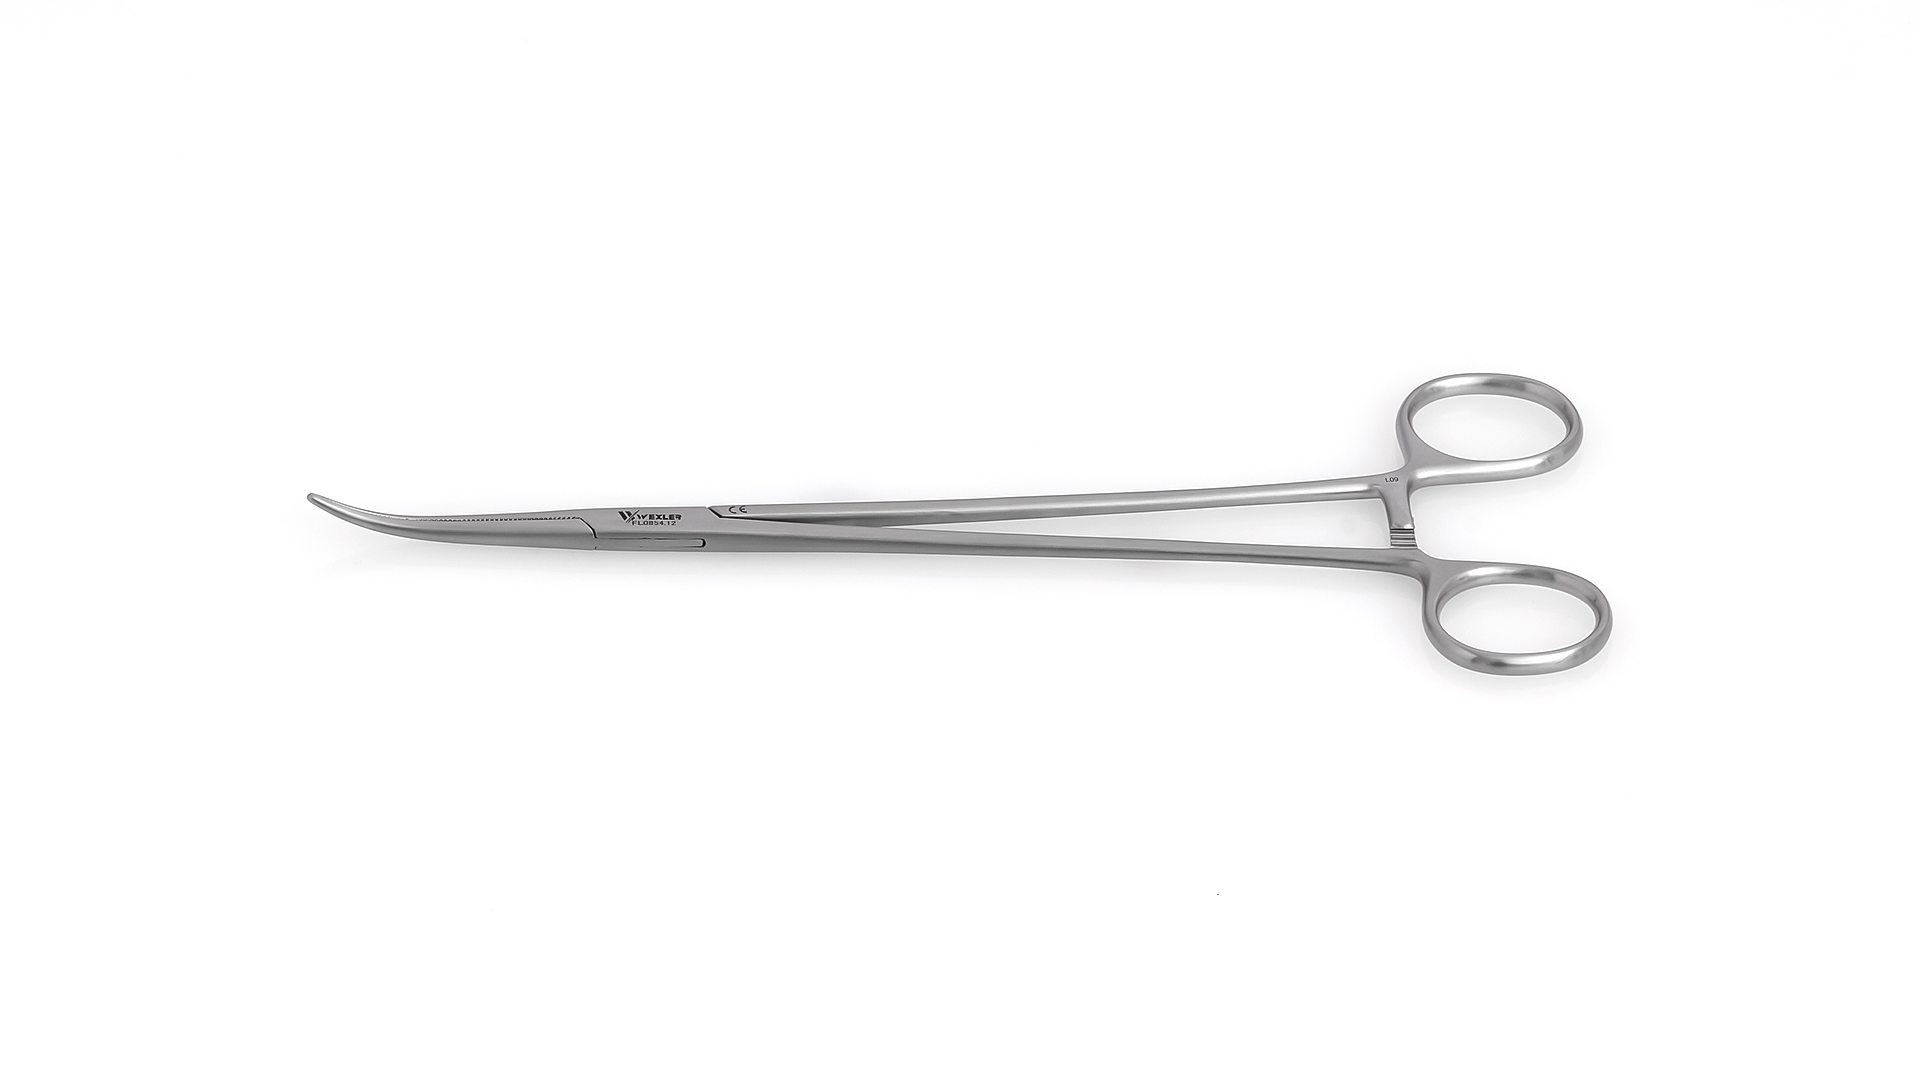 Bengolea Forceps - Curved serrated jaws